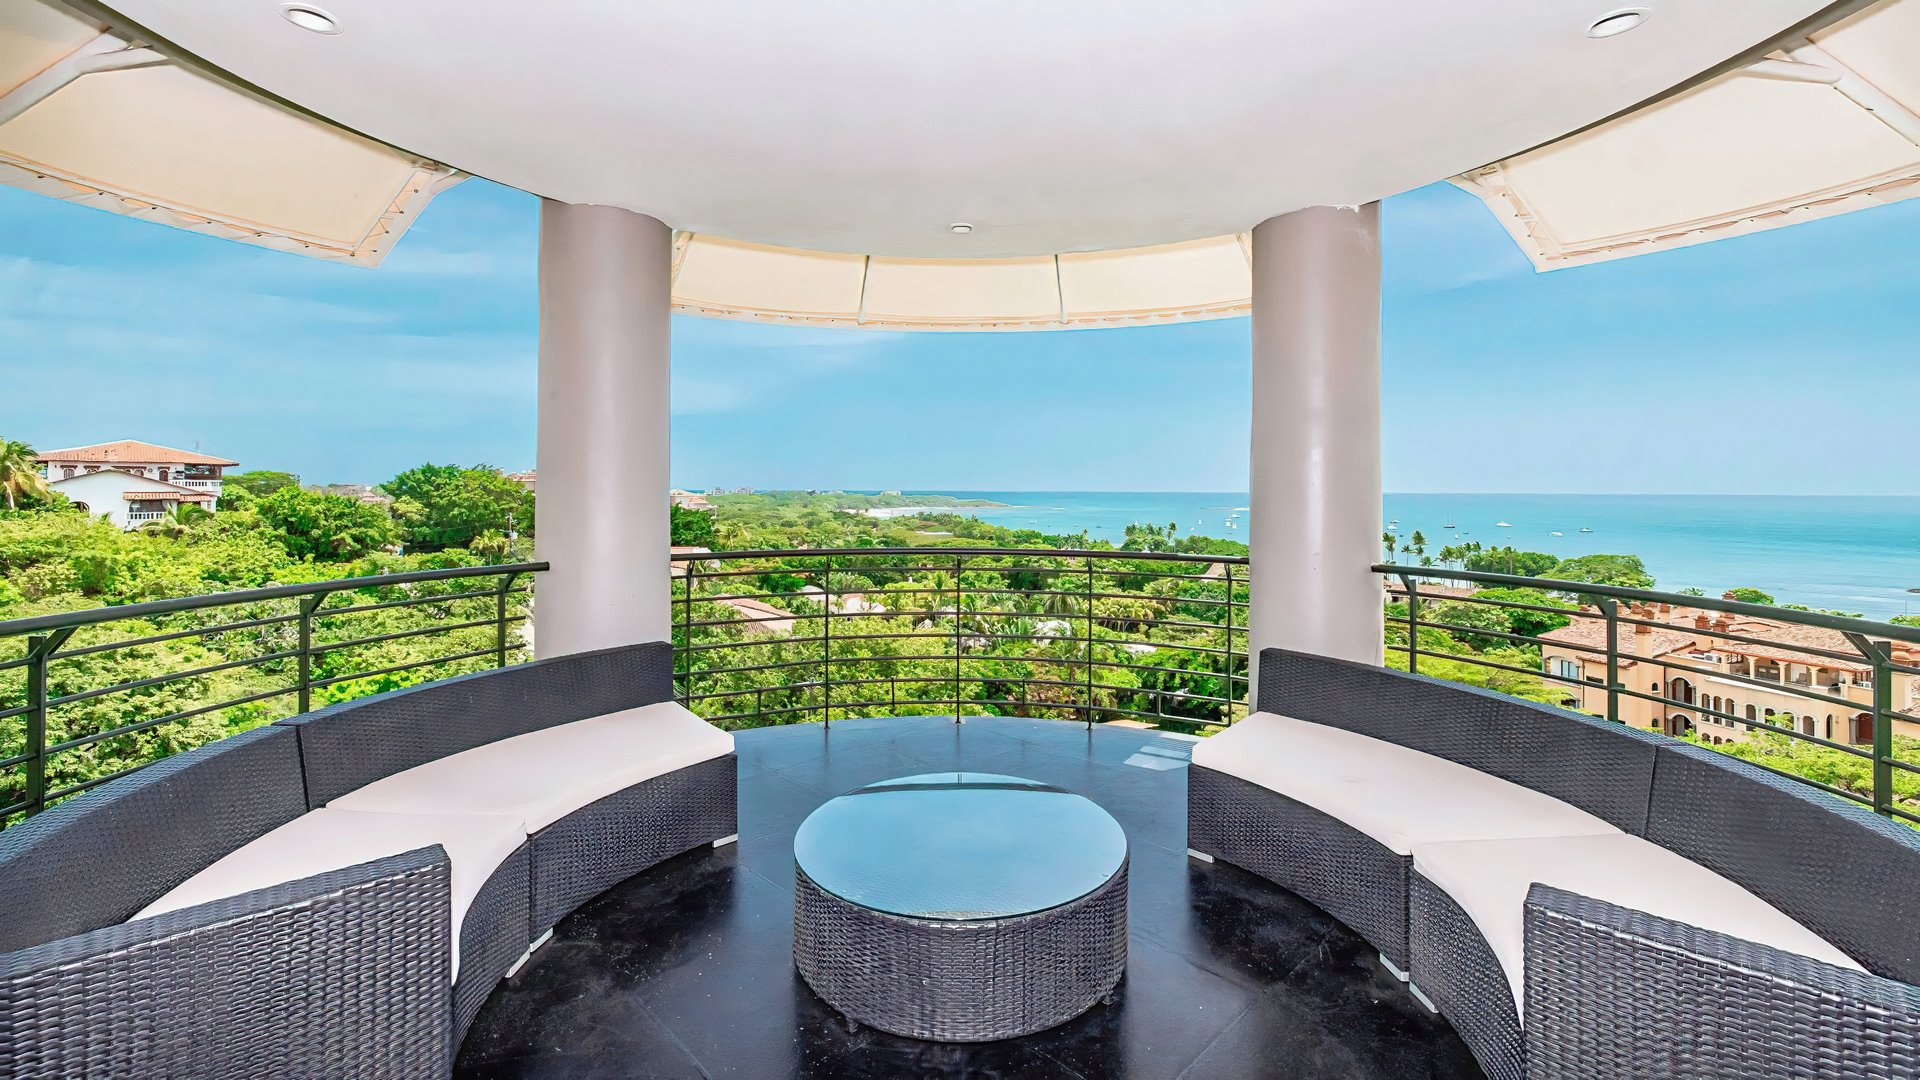 10001-The beautiful ocean views of the penthouse in Tamarindo, Costa Rica